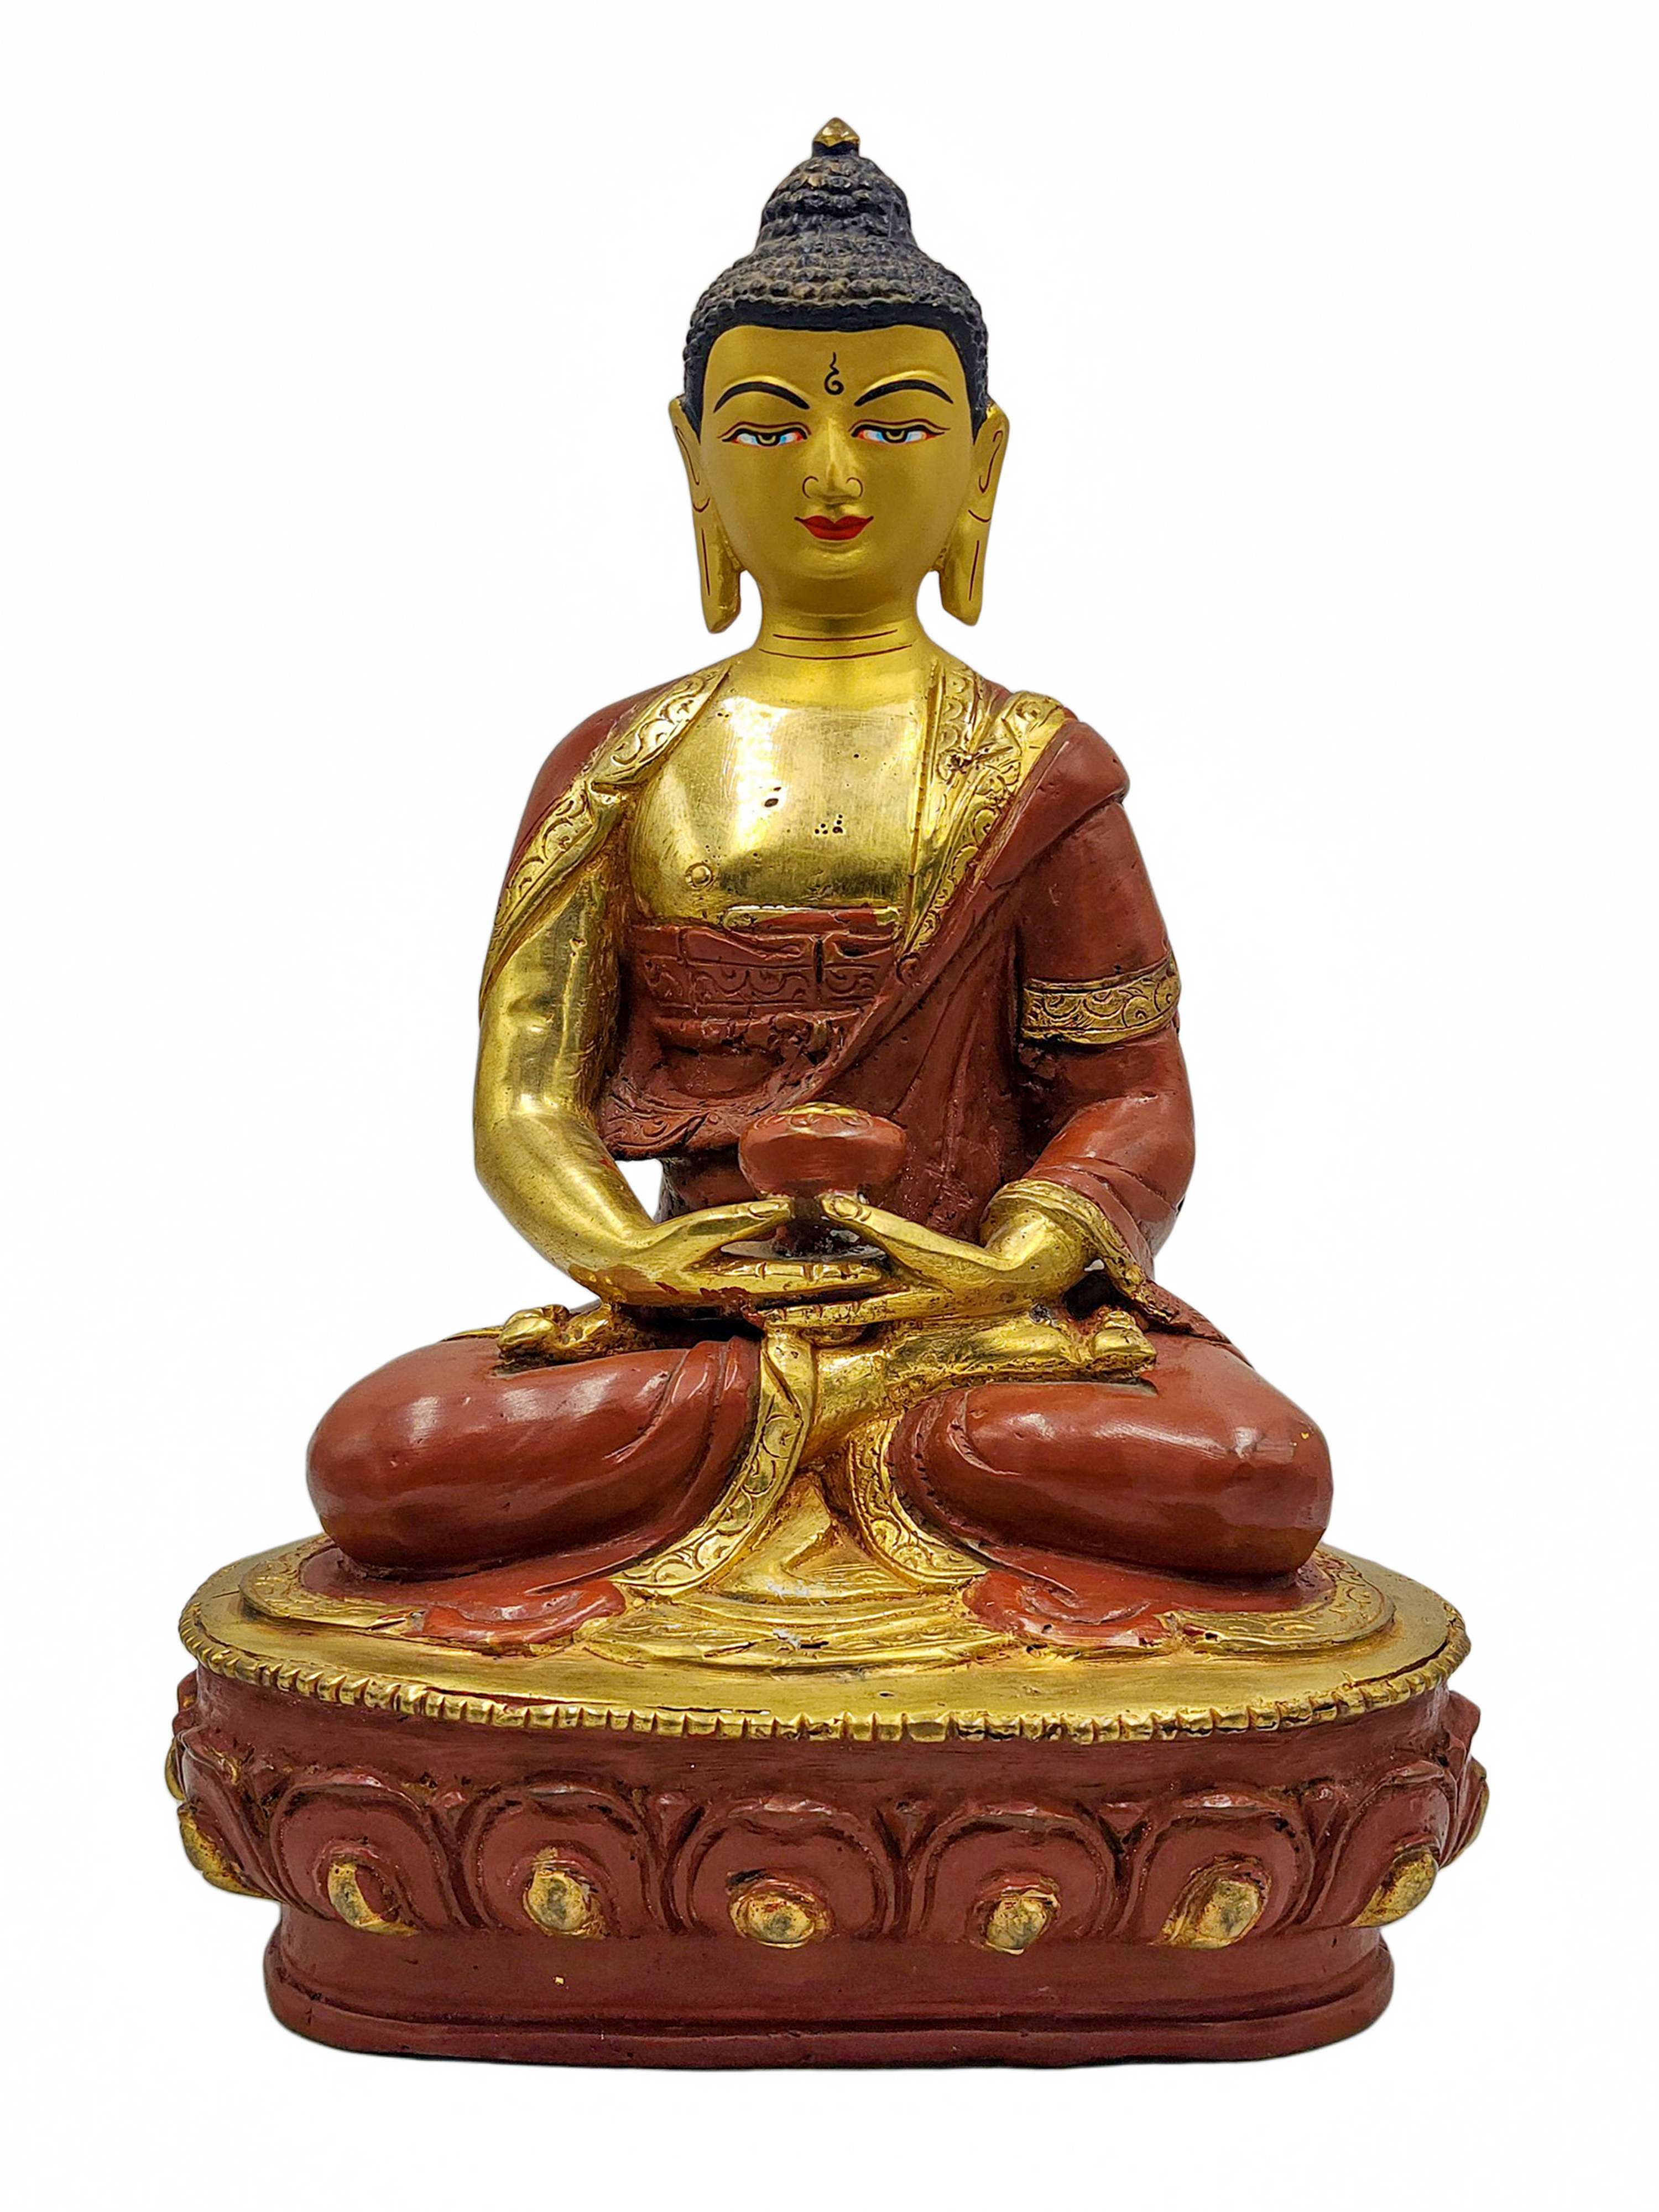 best Price, shakyamuni Buddha, Buddhist Handmade Statue, partly Gold Plated, Wtih face Painted, For A Gift, Altars And Buddhist Ritual